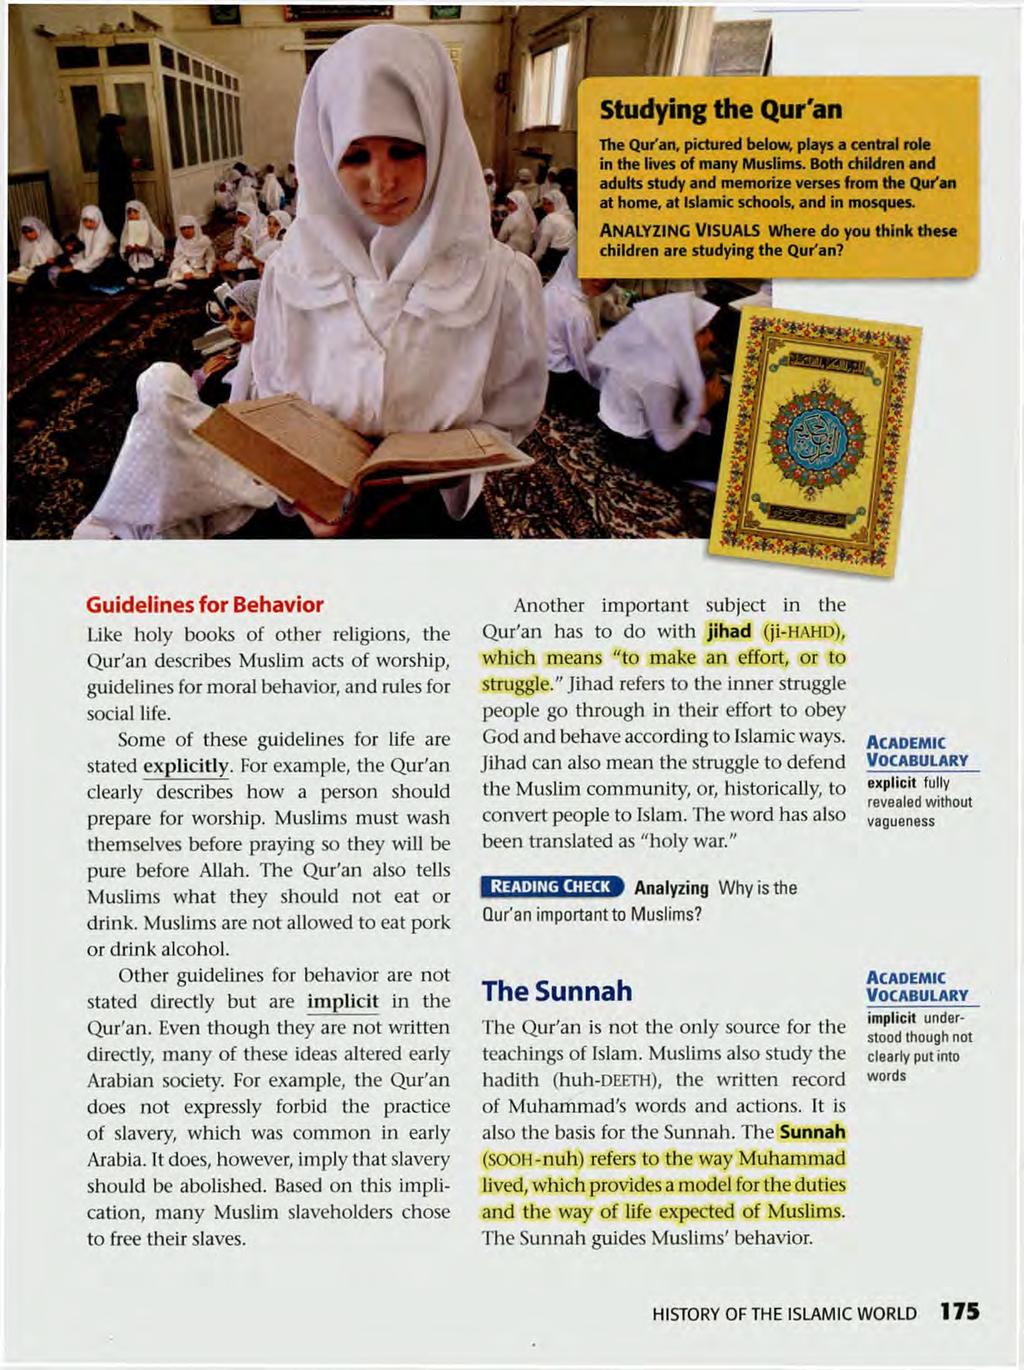 HI Studying the Qur'an The Qur'an, pictured below, plays a central role in the lives of many Muslims.